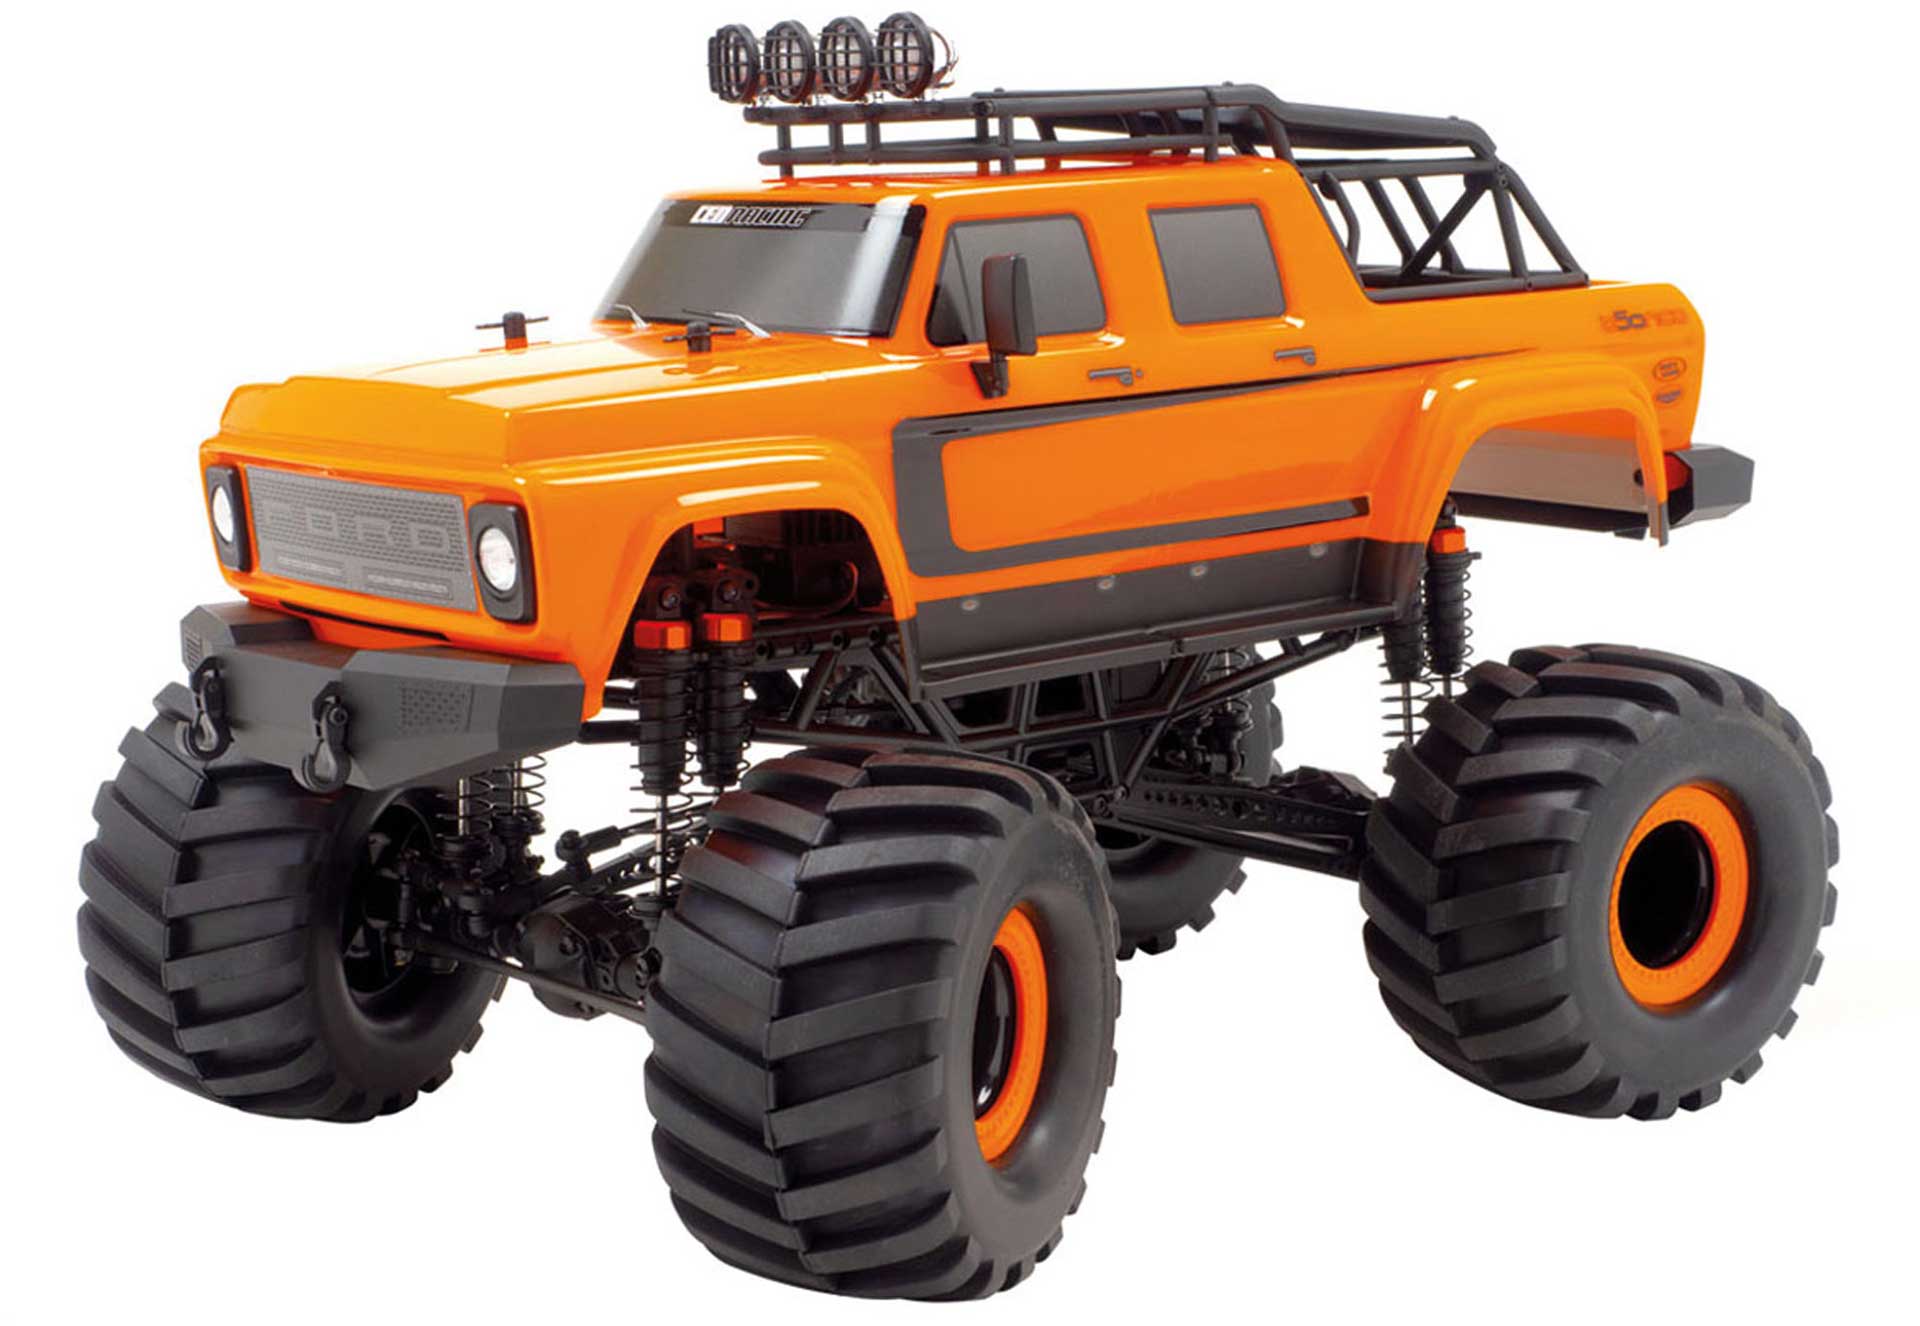 CEN FORD B50 MONSTER TRUCK 4WD SOLID AXLE 1/10 RTR EP